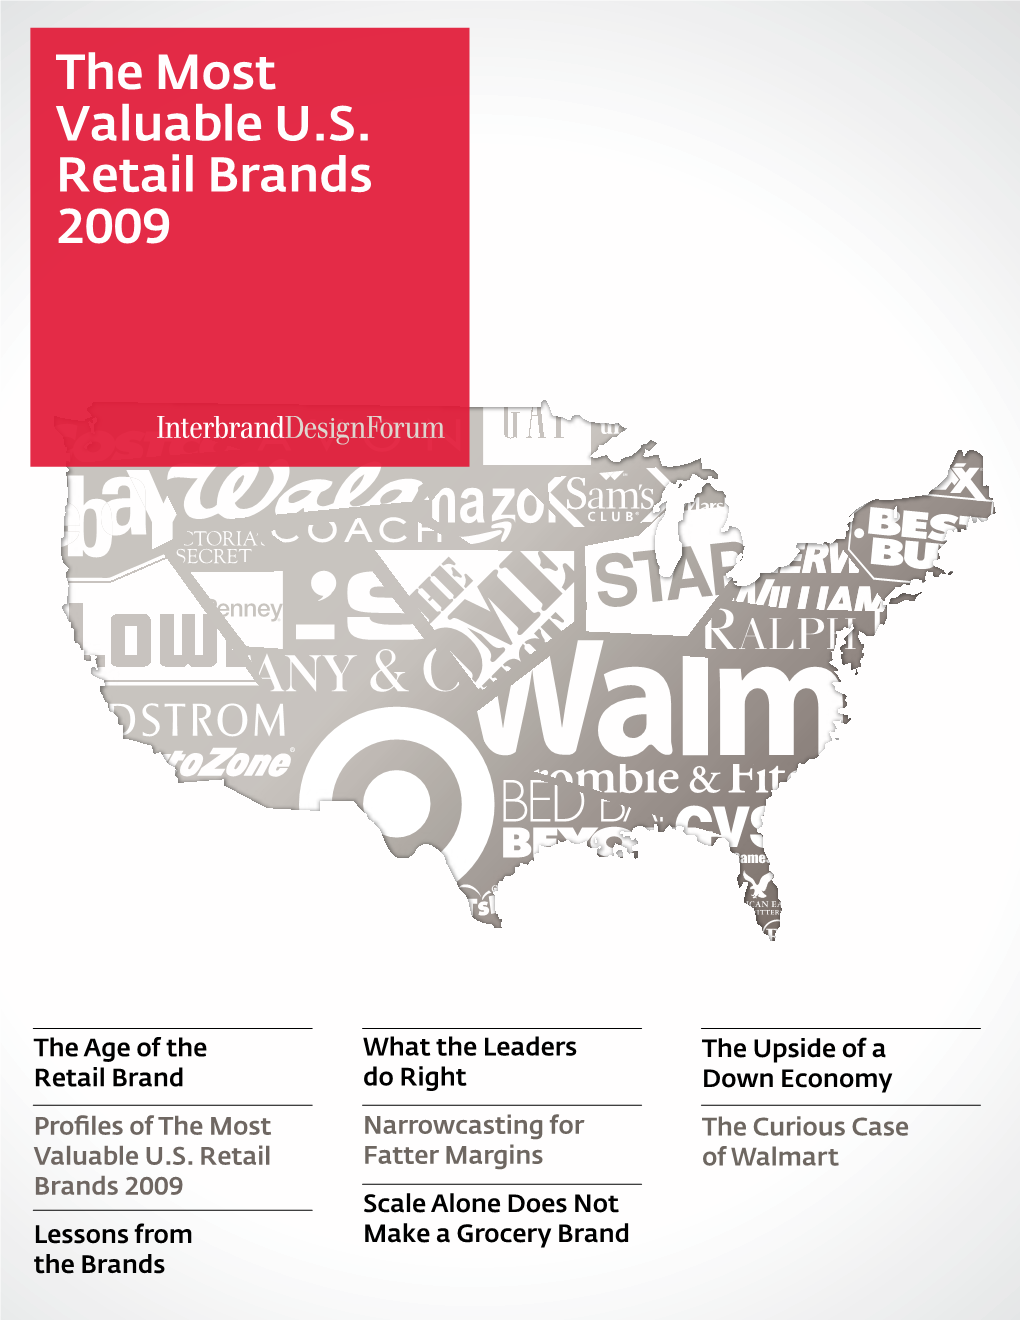 The Most Valuable U.S. Retail Brands 2009